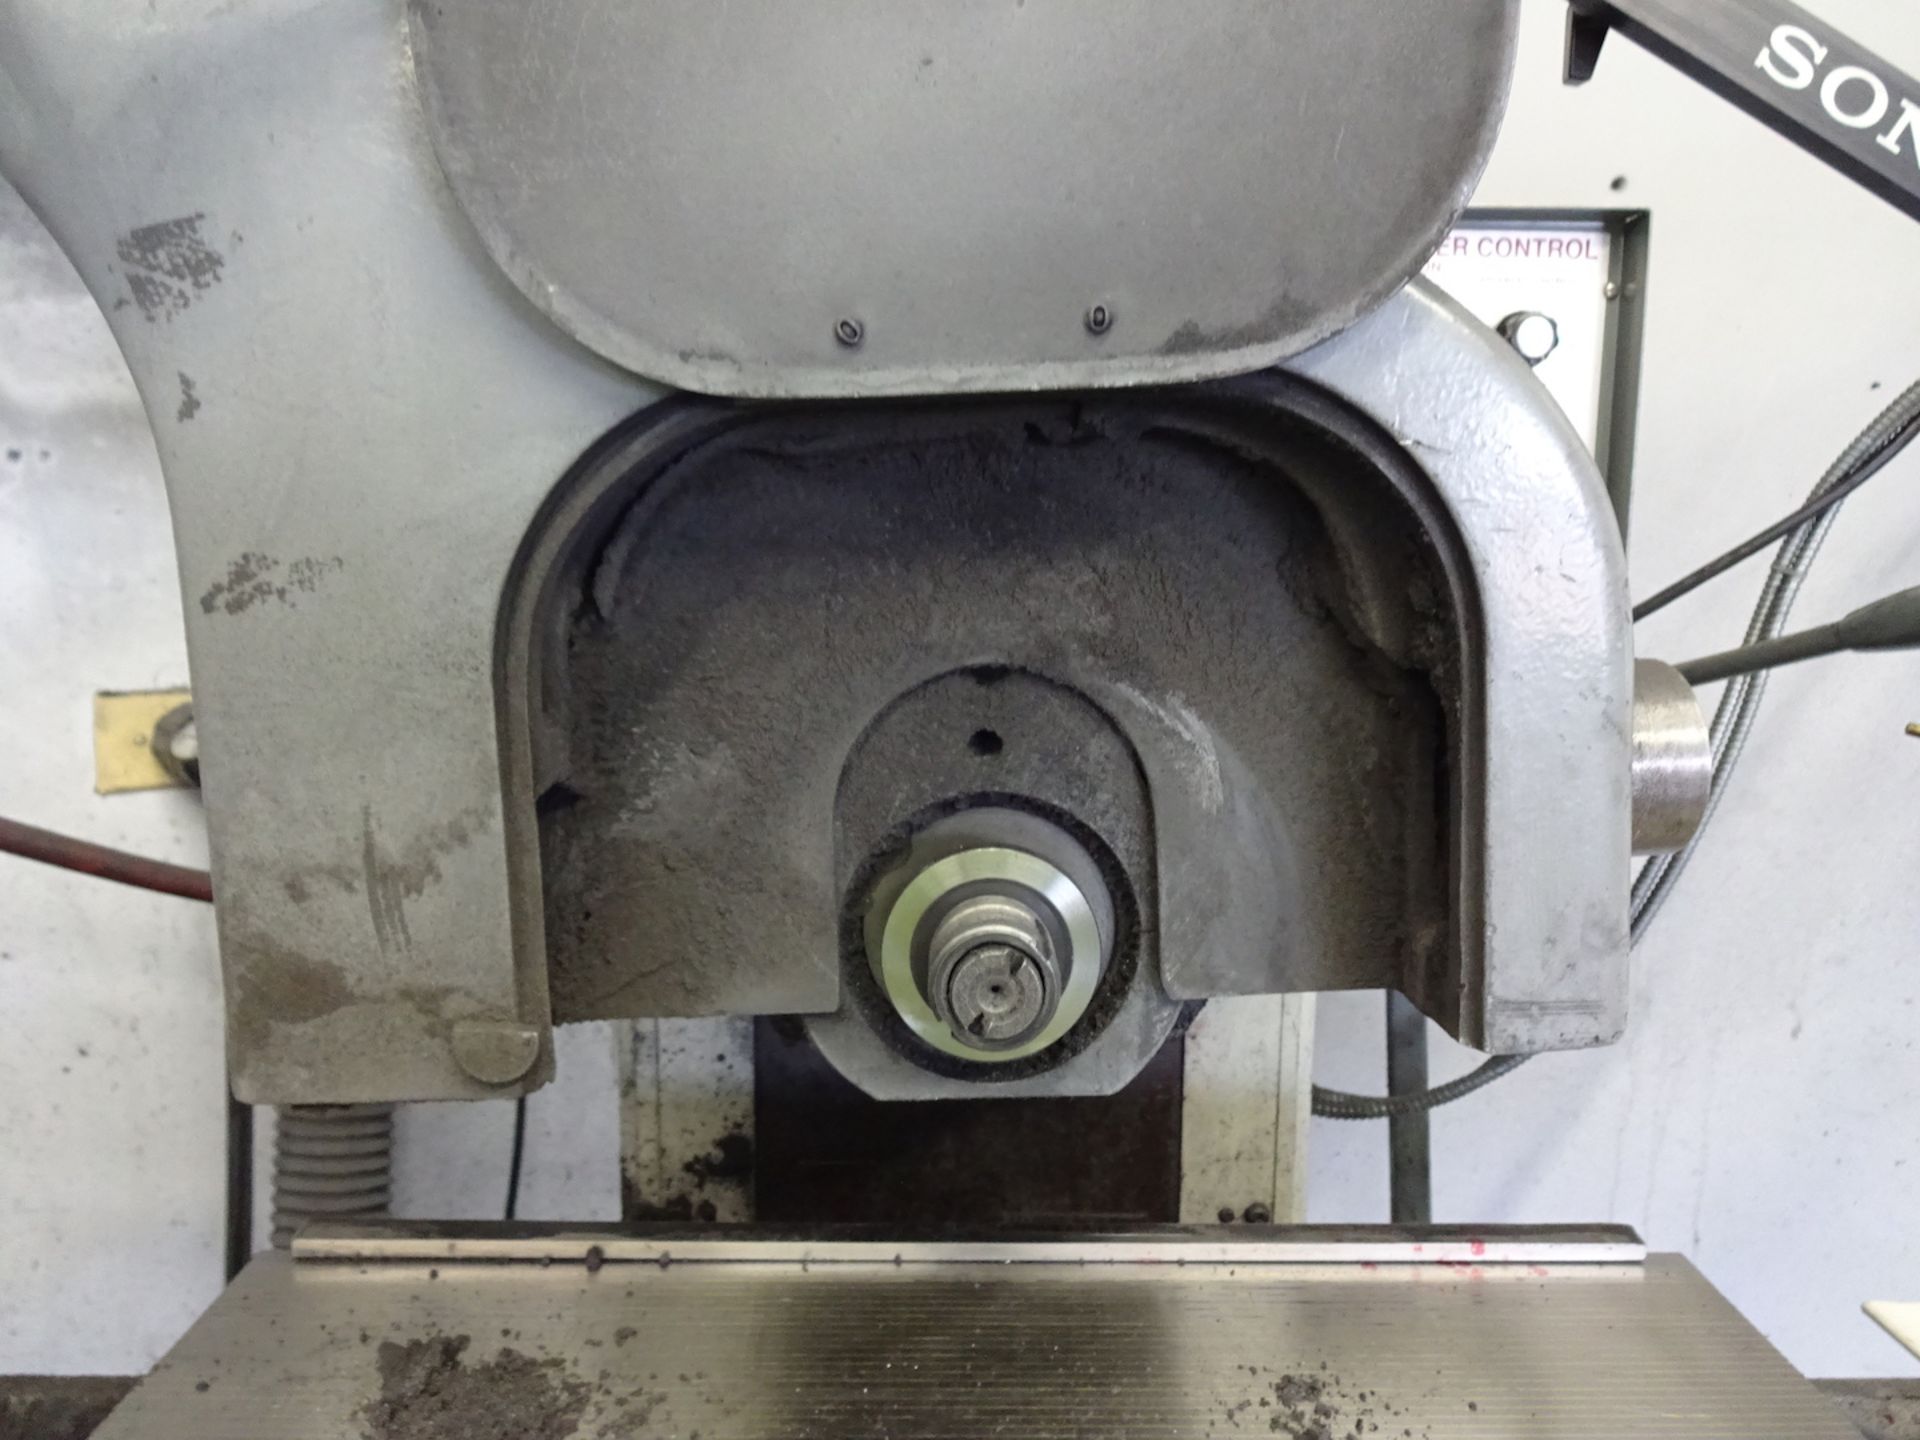 Okamoto 6 in. x 18 in. Model Linear 618 Hand Feed Surface Grinder, S/N 4785, Sony LG10 2-Axis - Image 6 of 6